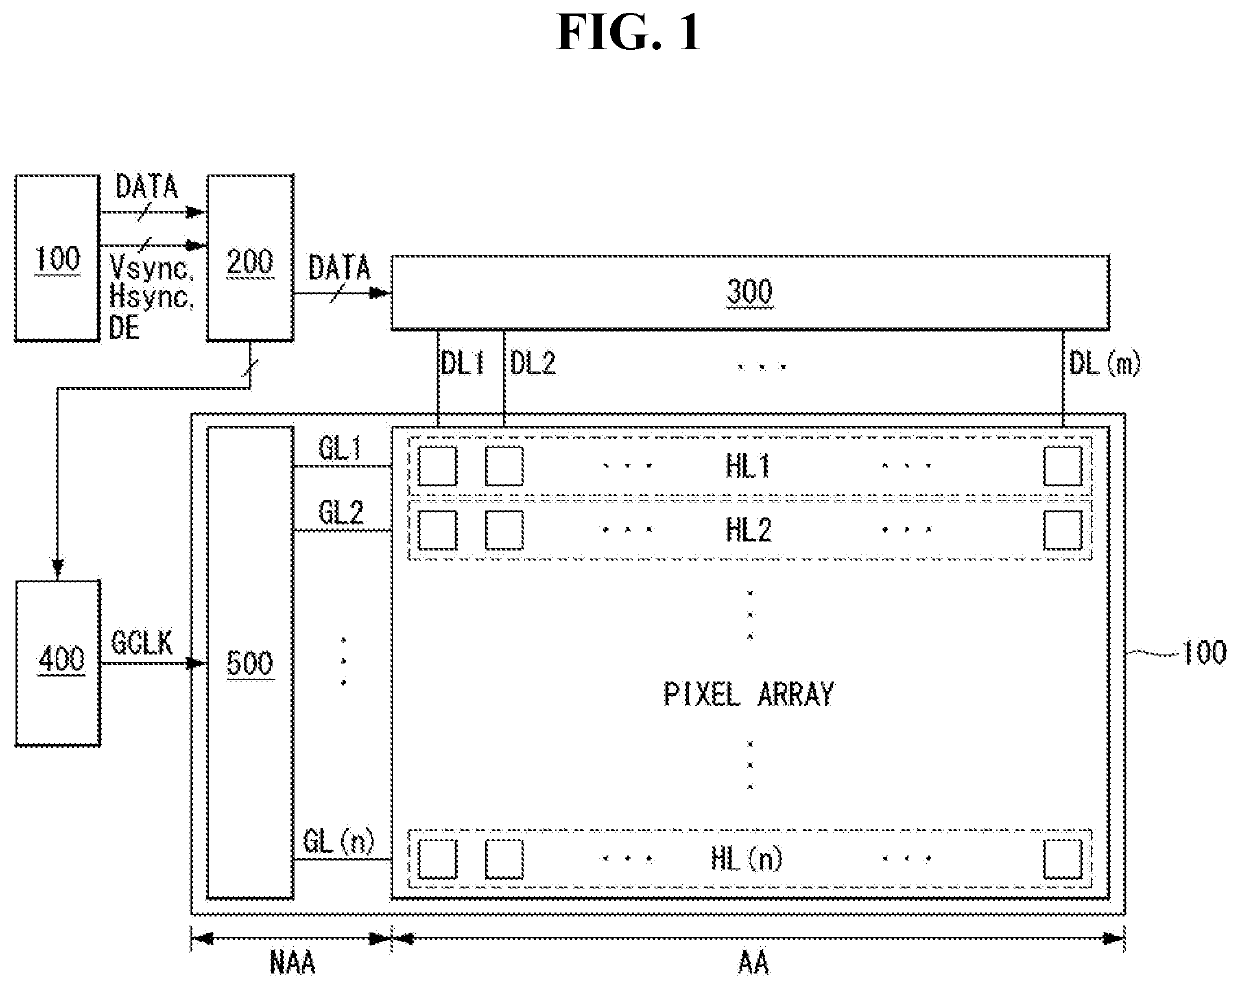 Pixel for organic light emitting diode display and OLED display